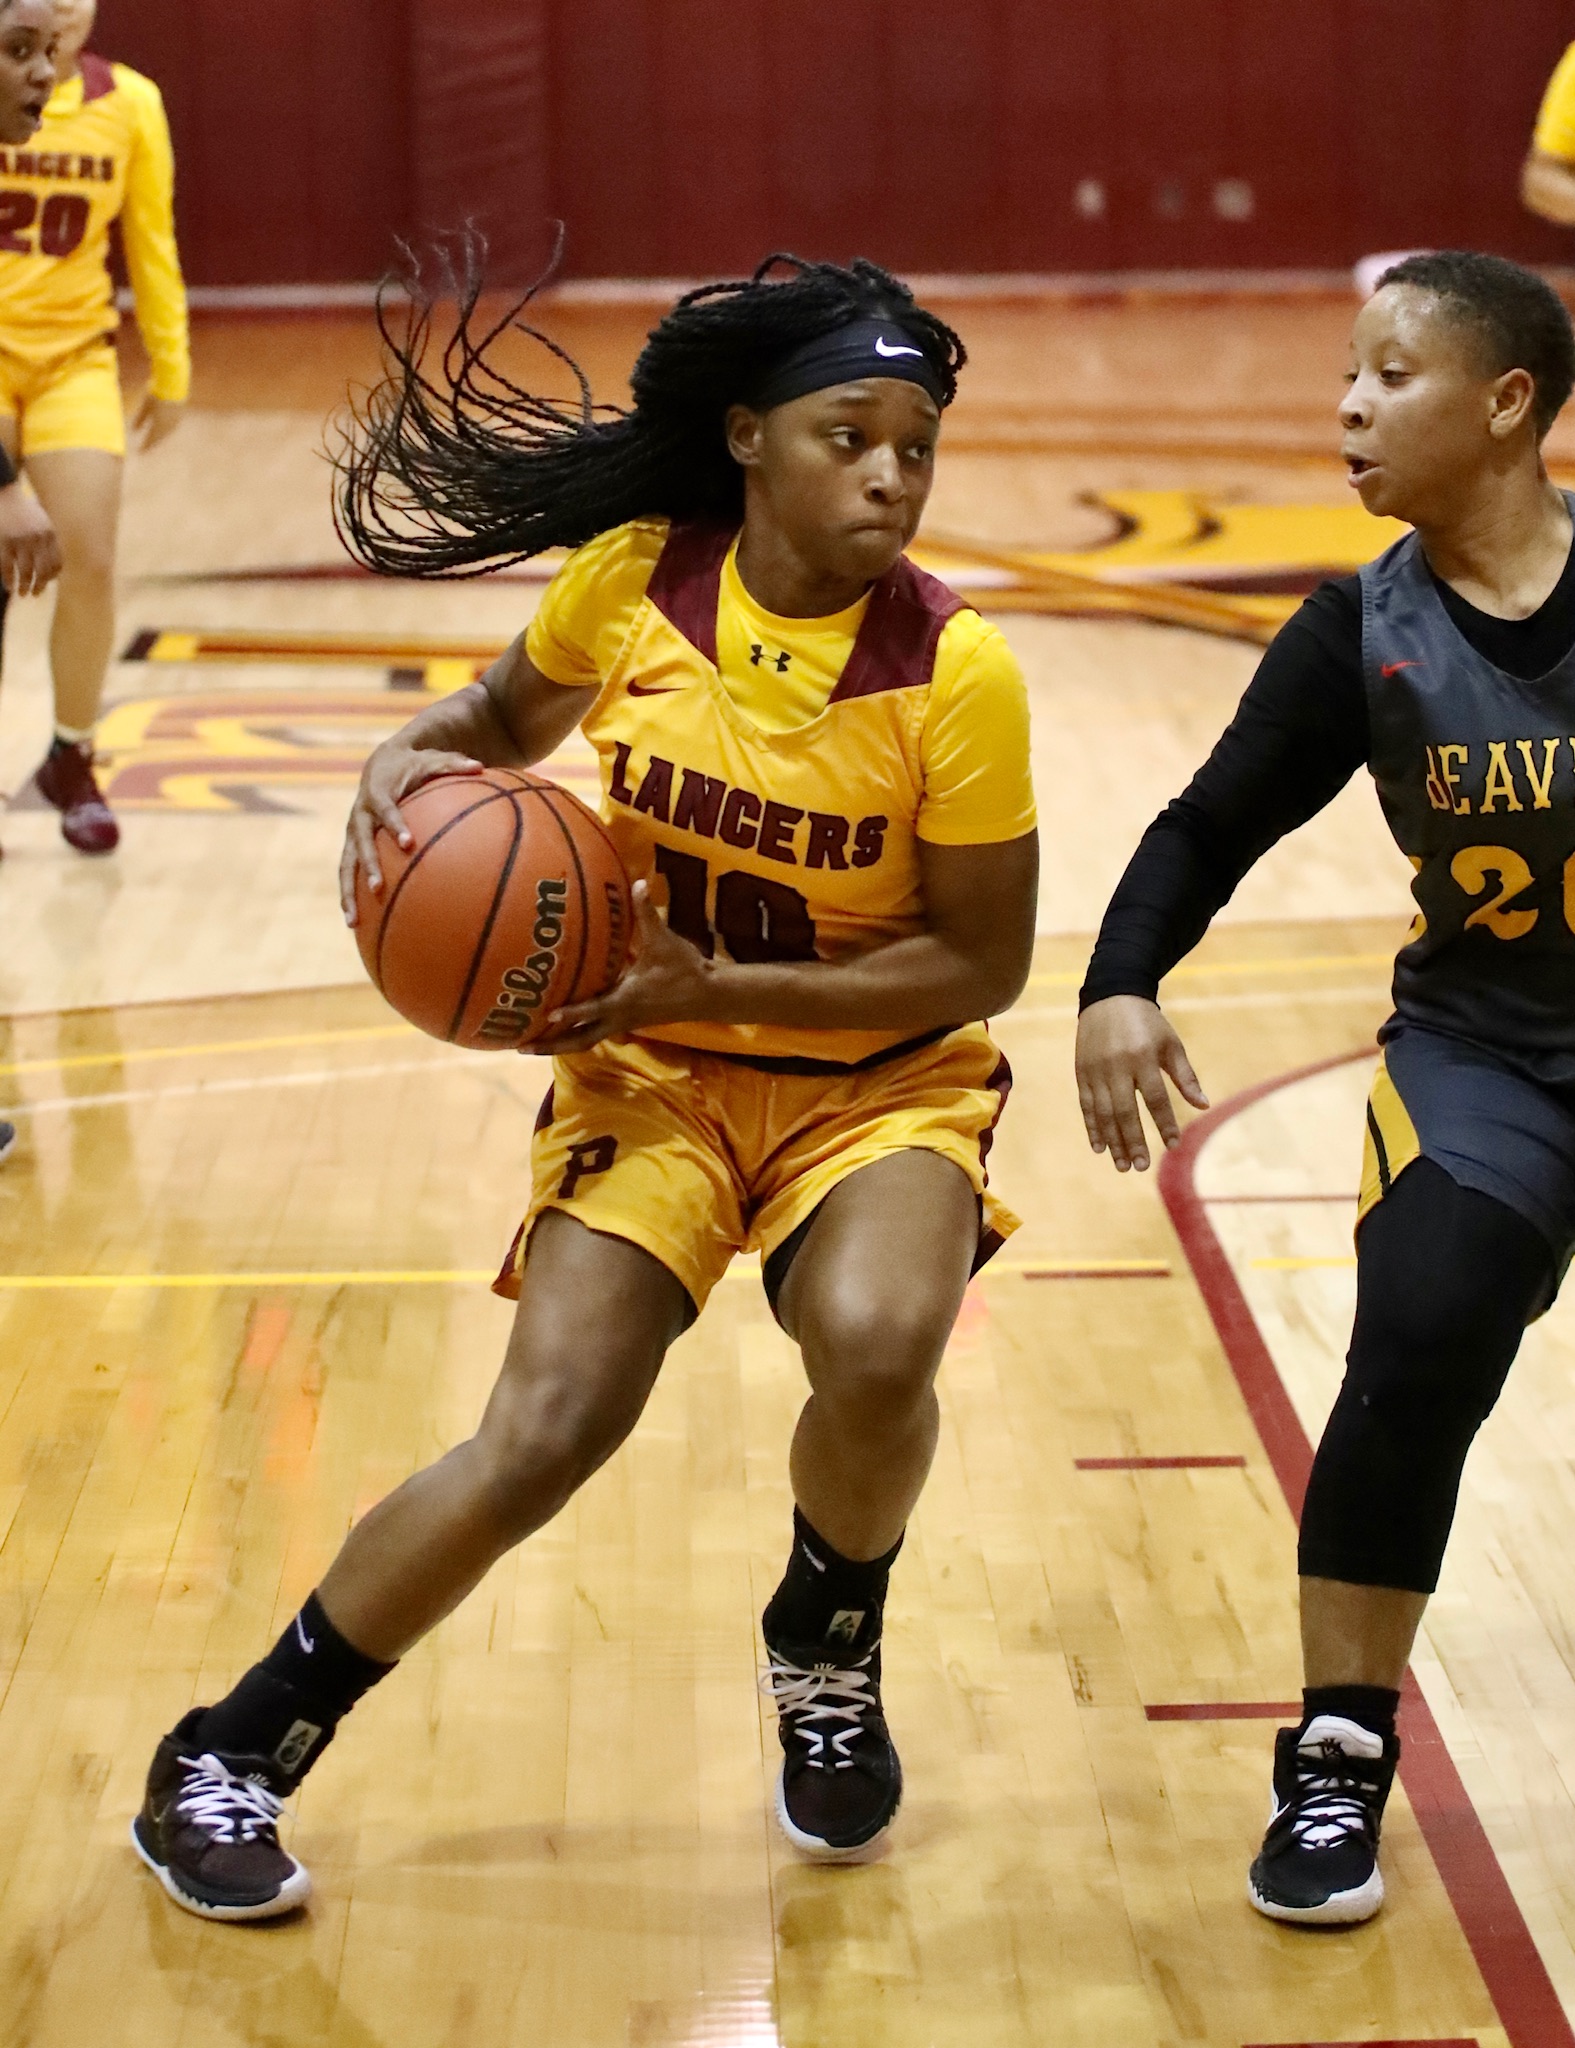 Kaniya Hill had one of her strongest performances of the season v. LA Trade Tech on Wednesday (photo by Michael Watkins, Athletics).